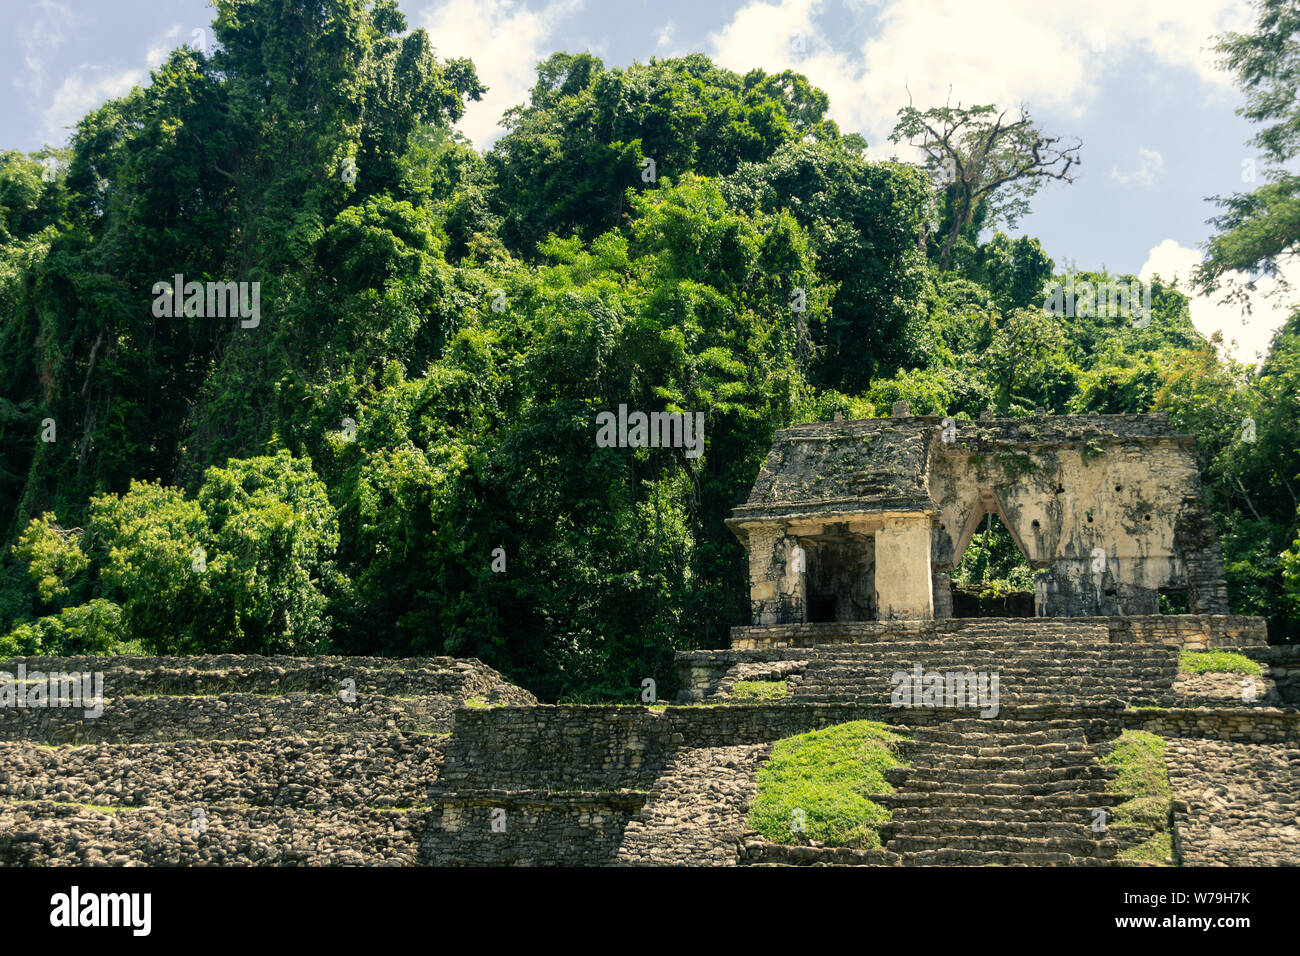 Palenque, Chiapas / Mexico - 21/07/2019: Detail of the archaeological pre hispanic mayan site of Palenque in Chiapas Mexico Stock Photo